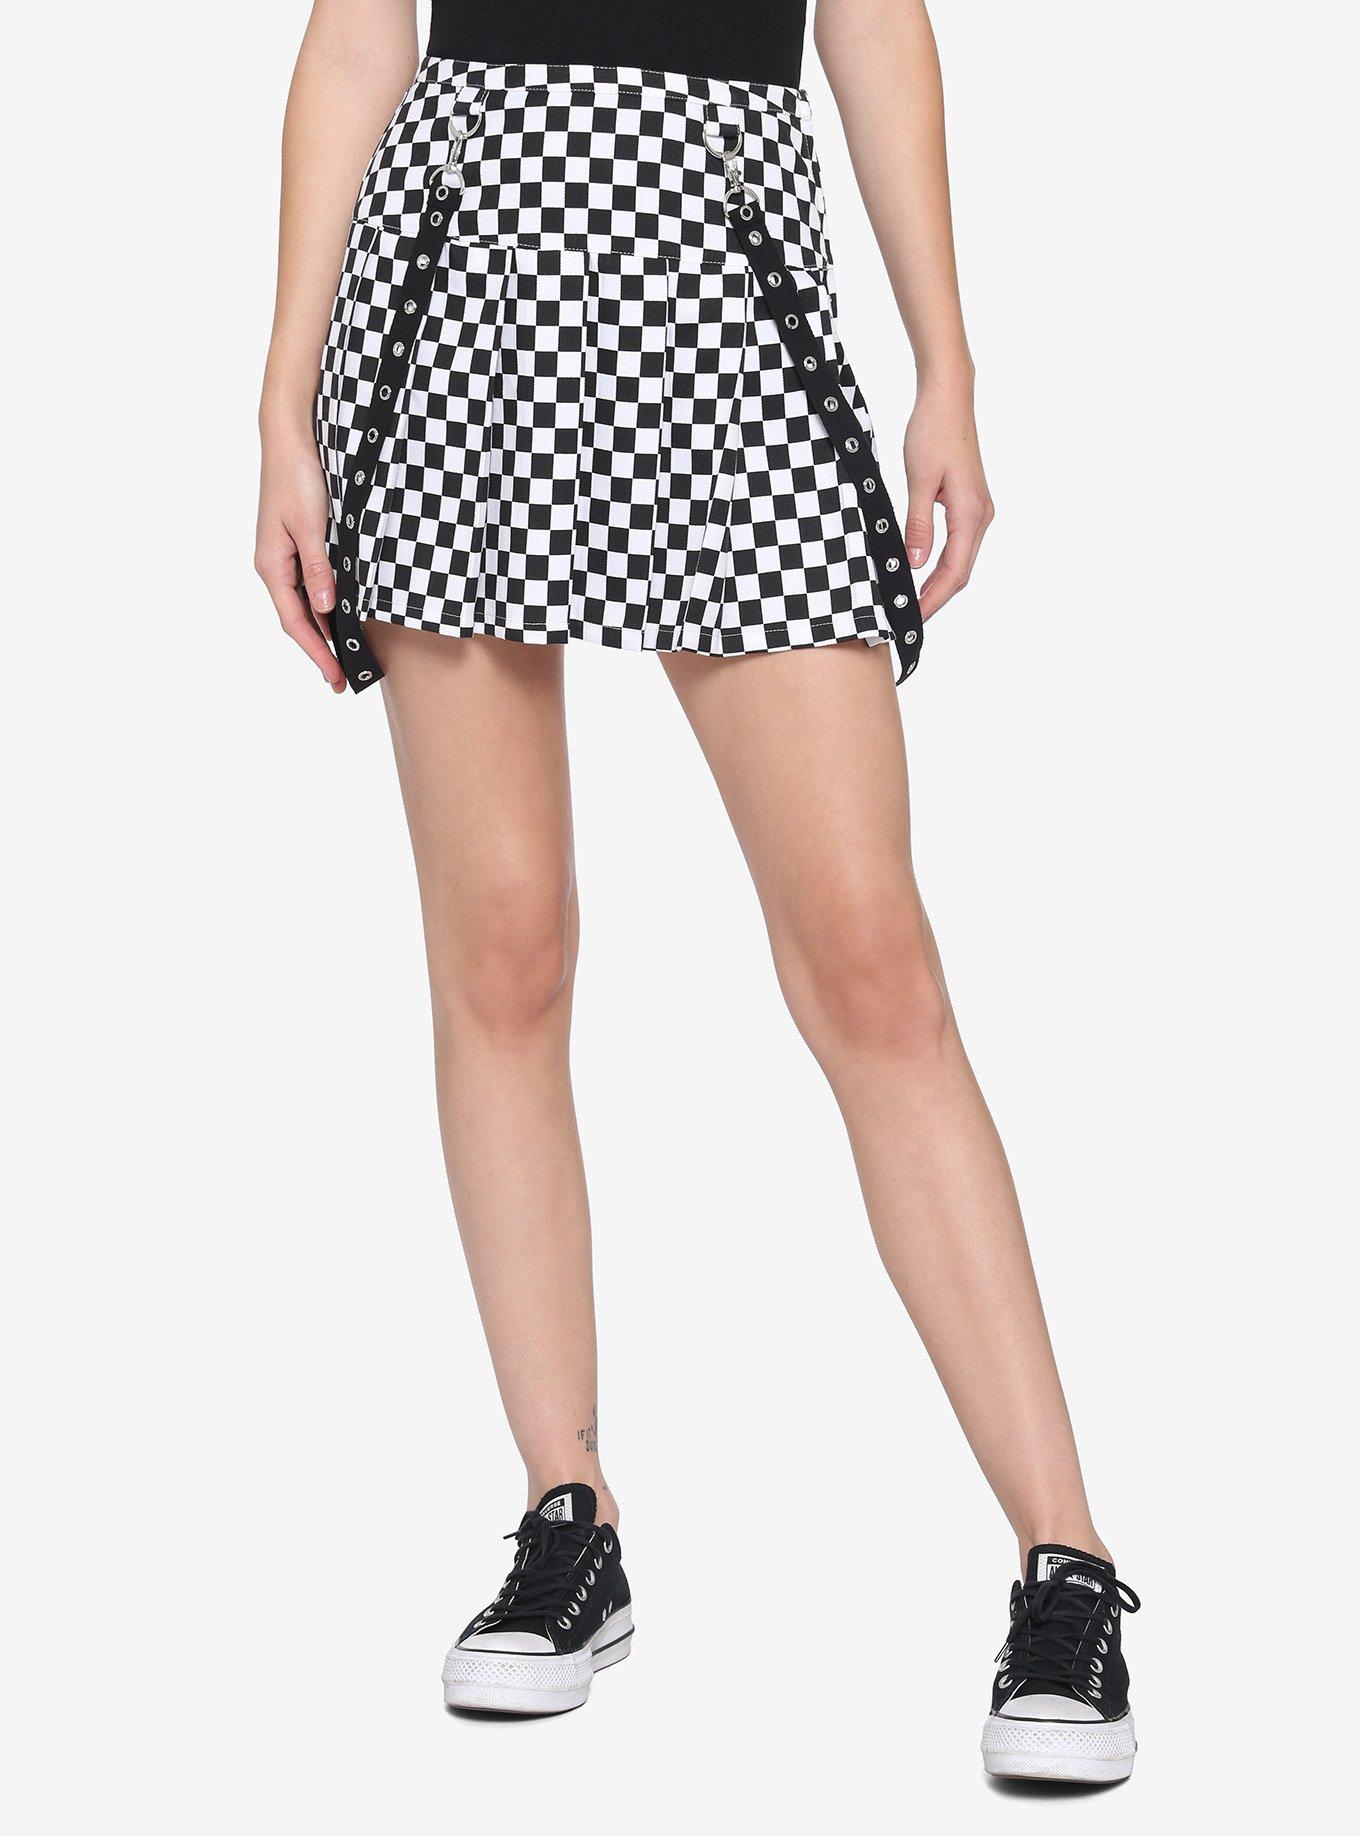 Silver Grommet Pleated Checkered Suspender Skirt, CHECKERED, hi-res